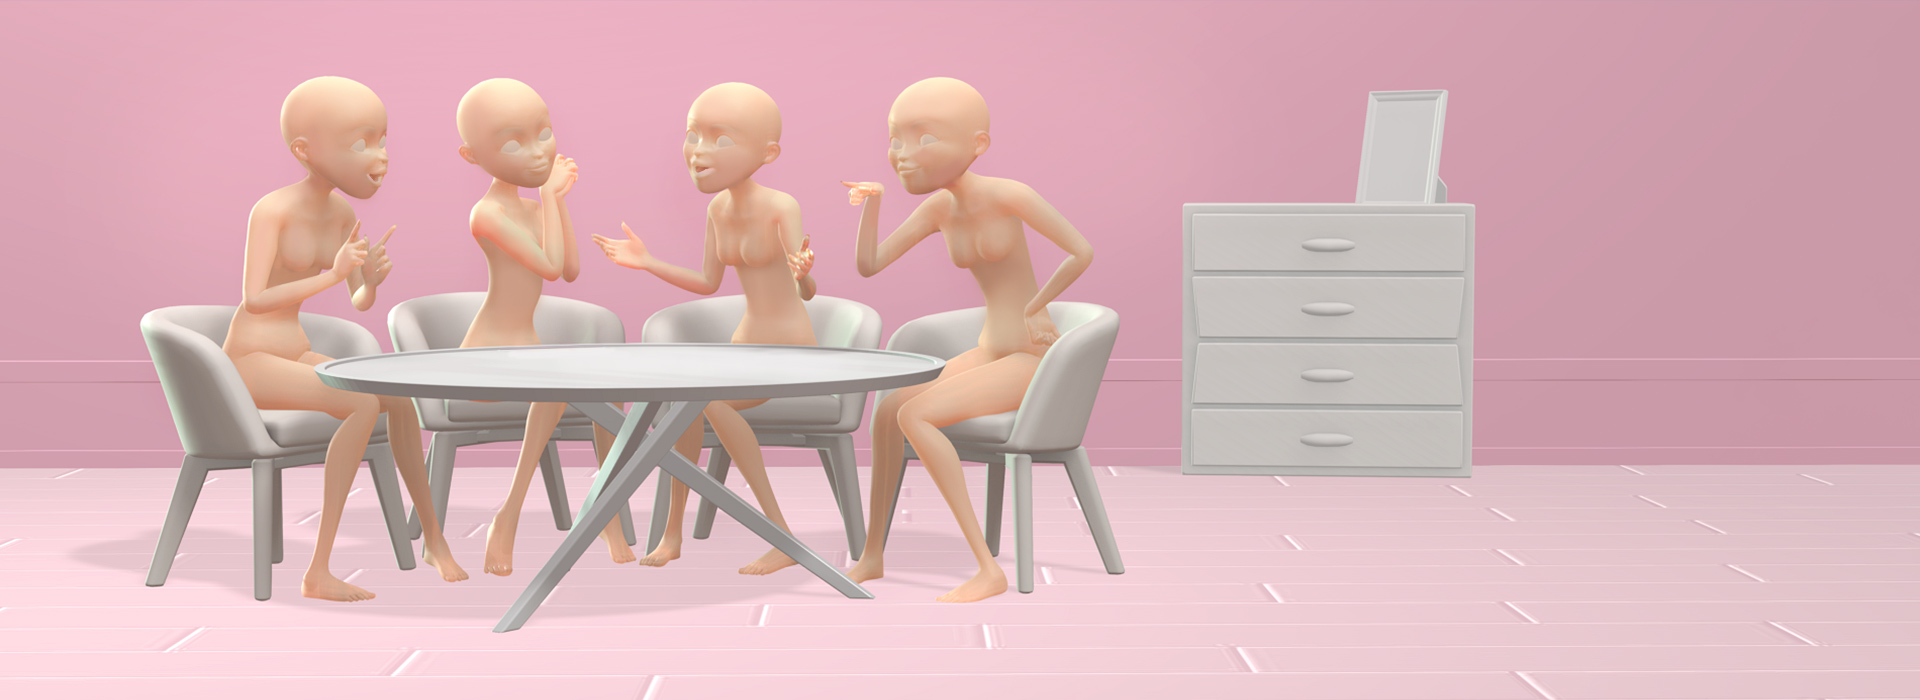 classical cartoon motion - sit and talk female